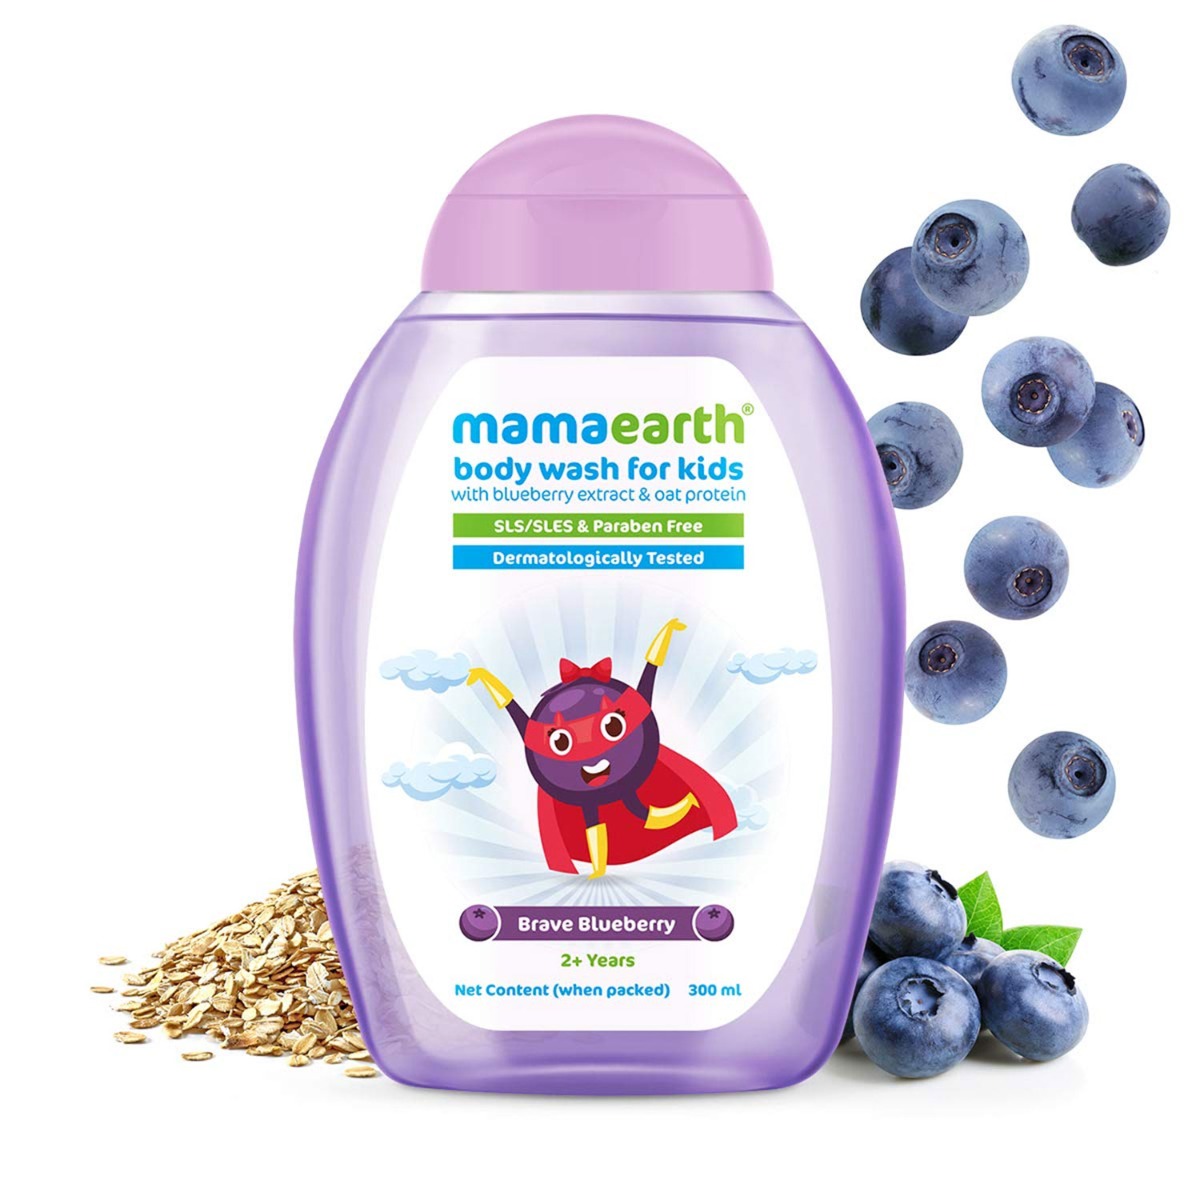 MamaEarth Body Wash for Kids with Blueberry Extract & Oat Protein, 300ml